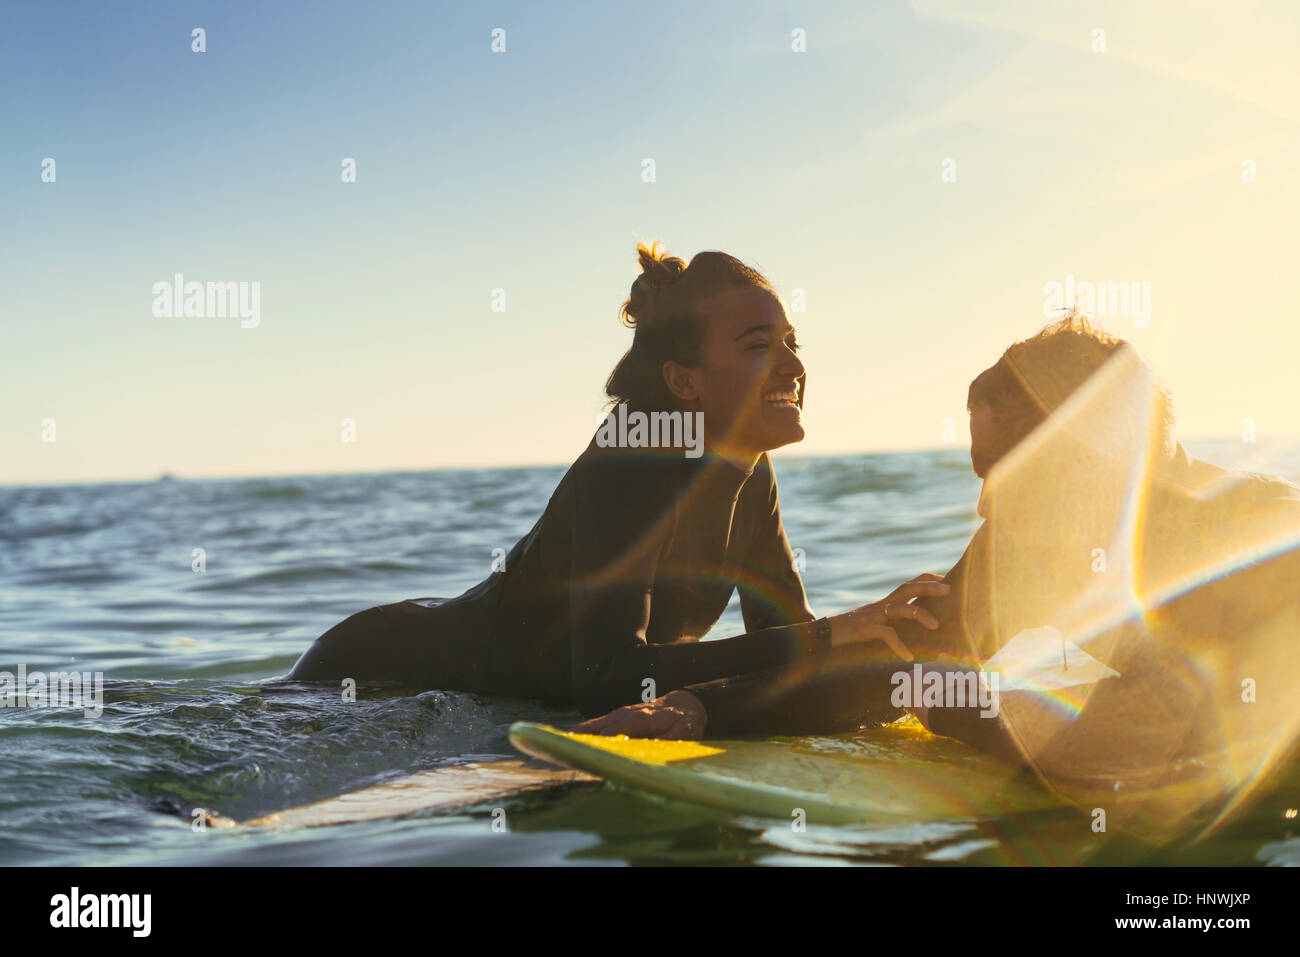 Surfing couple leaning on surfboards in sea, Newport Beach, California, USA Stock Photo